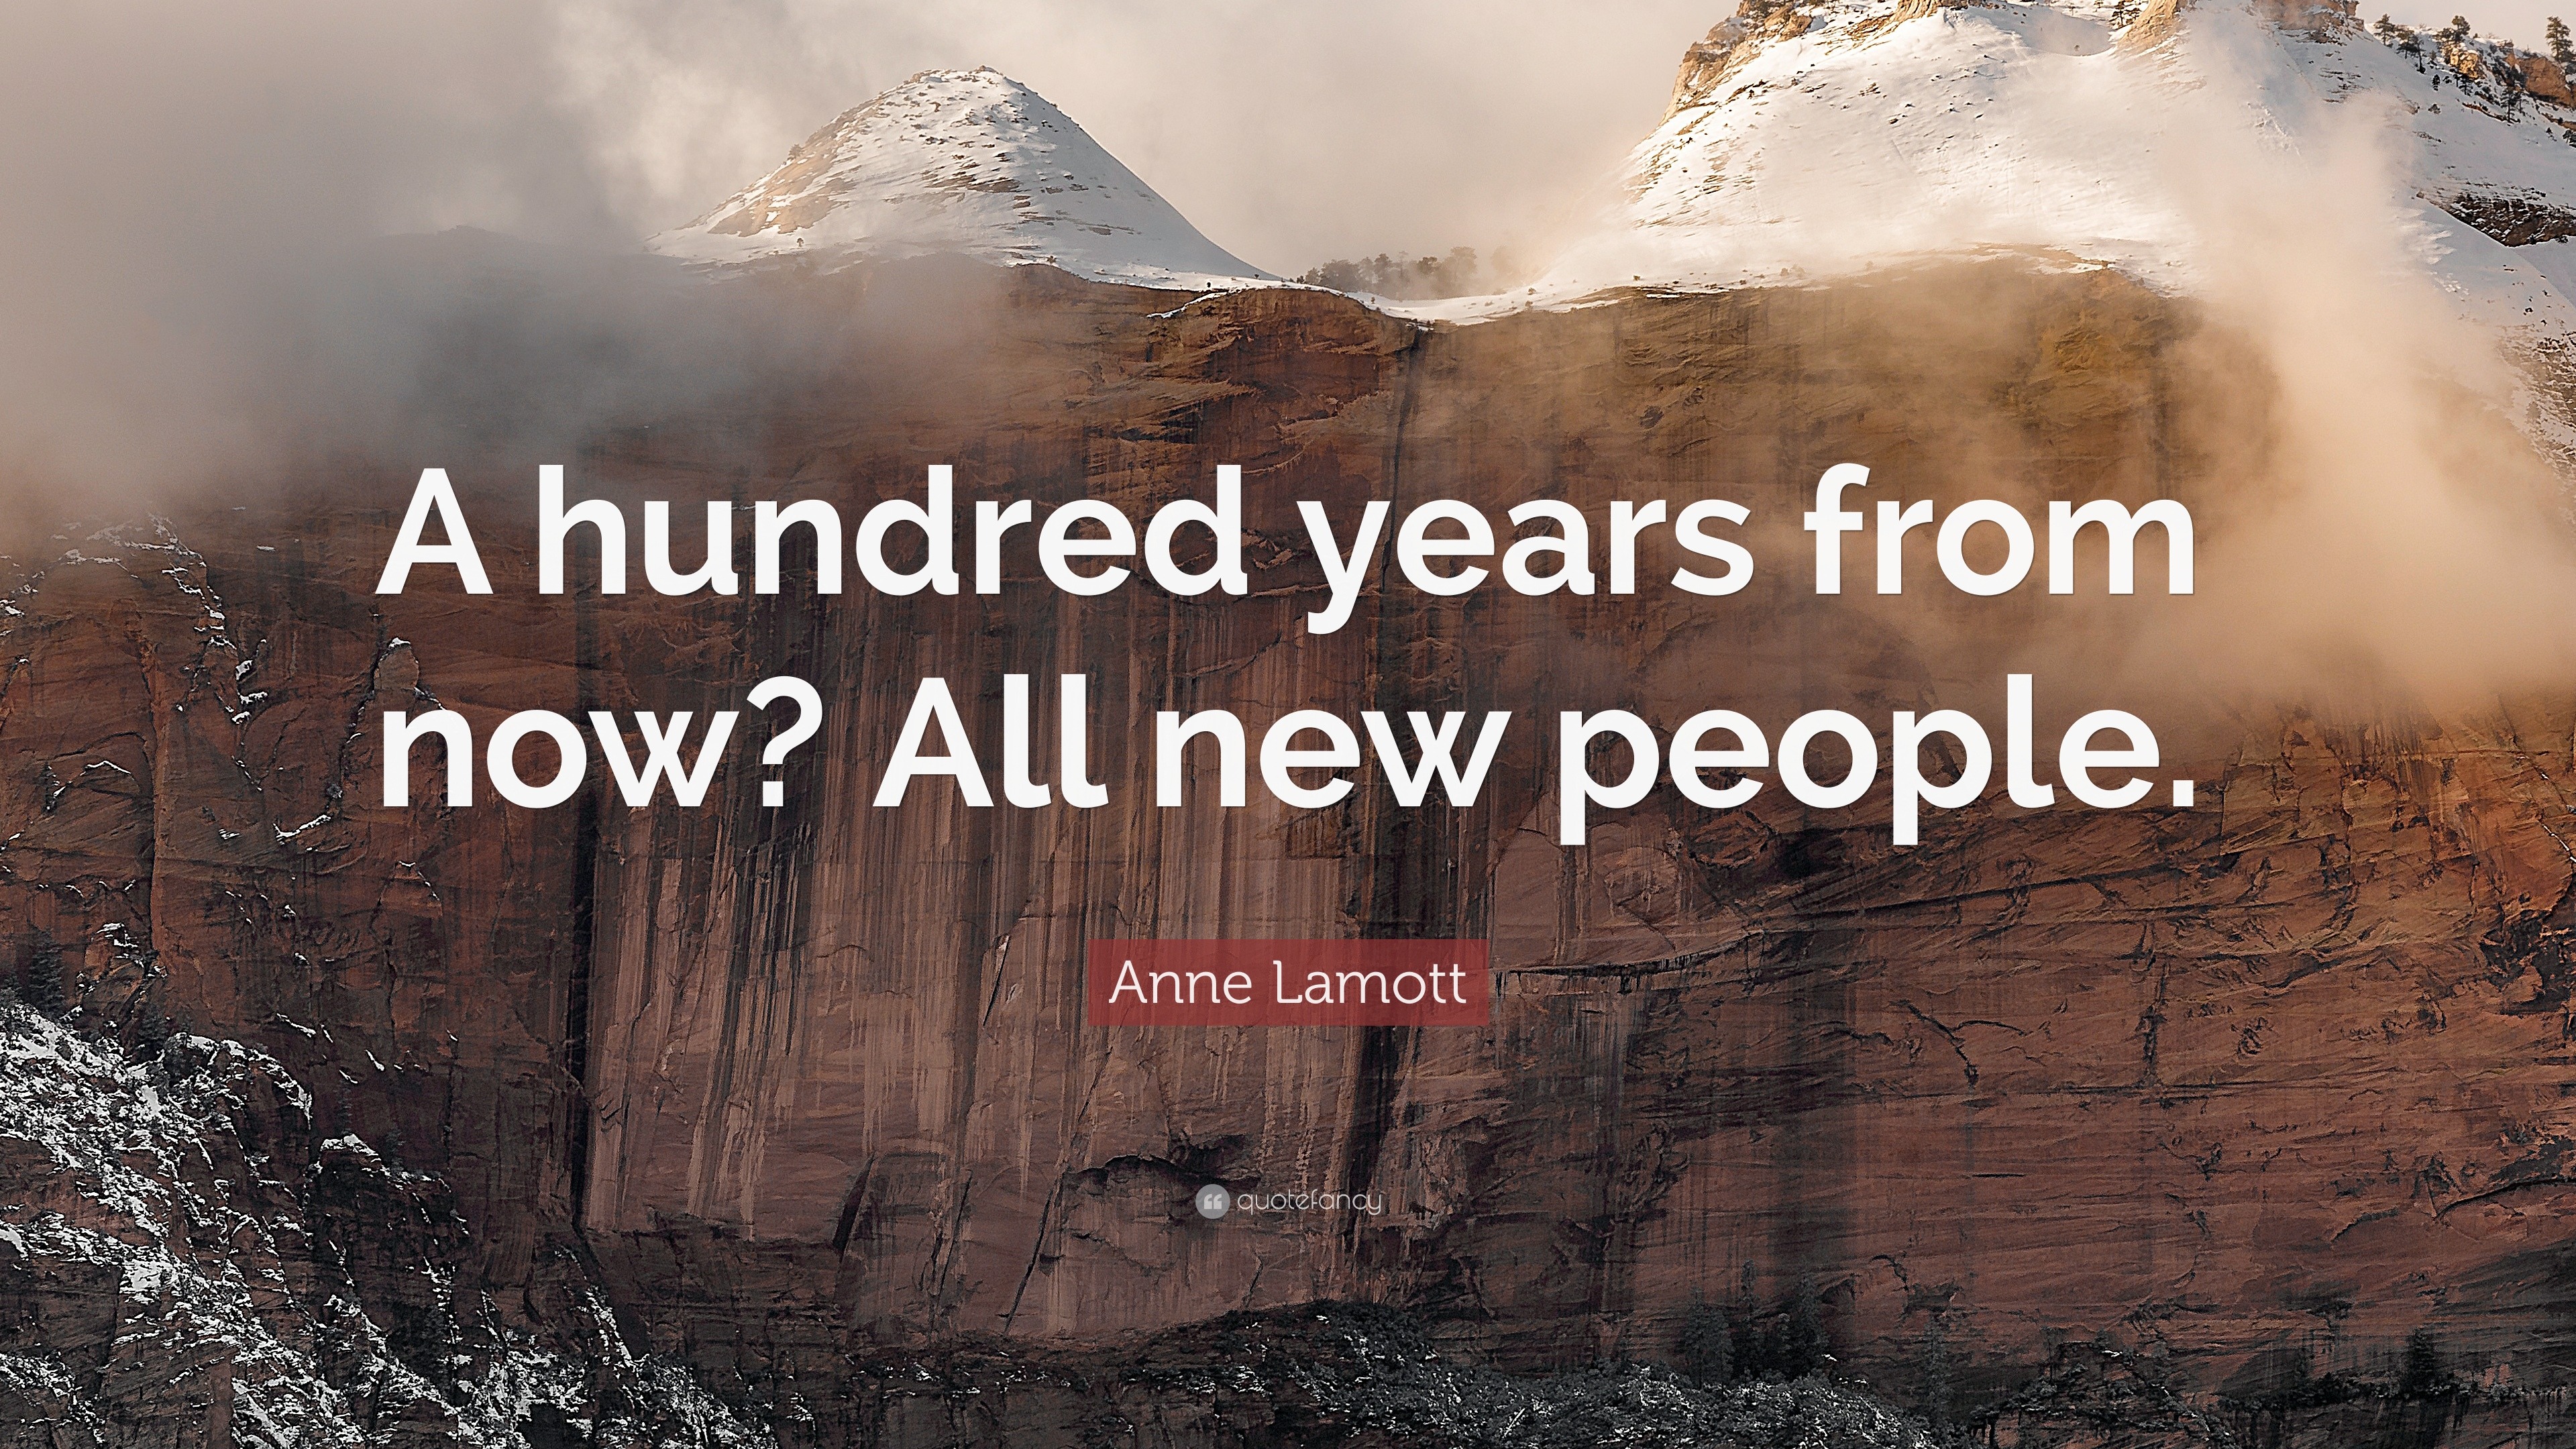 Anne Lamott Quote “A hundred years from now? All new people.”